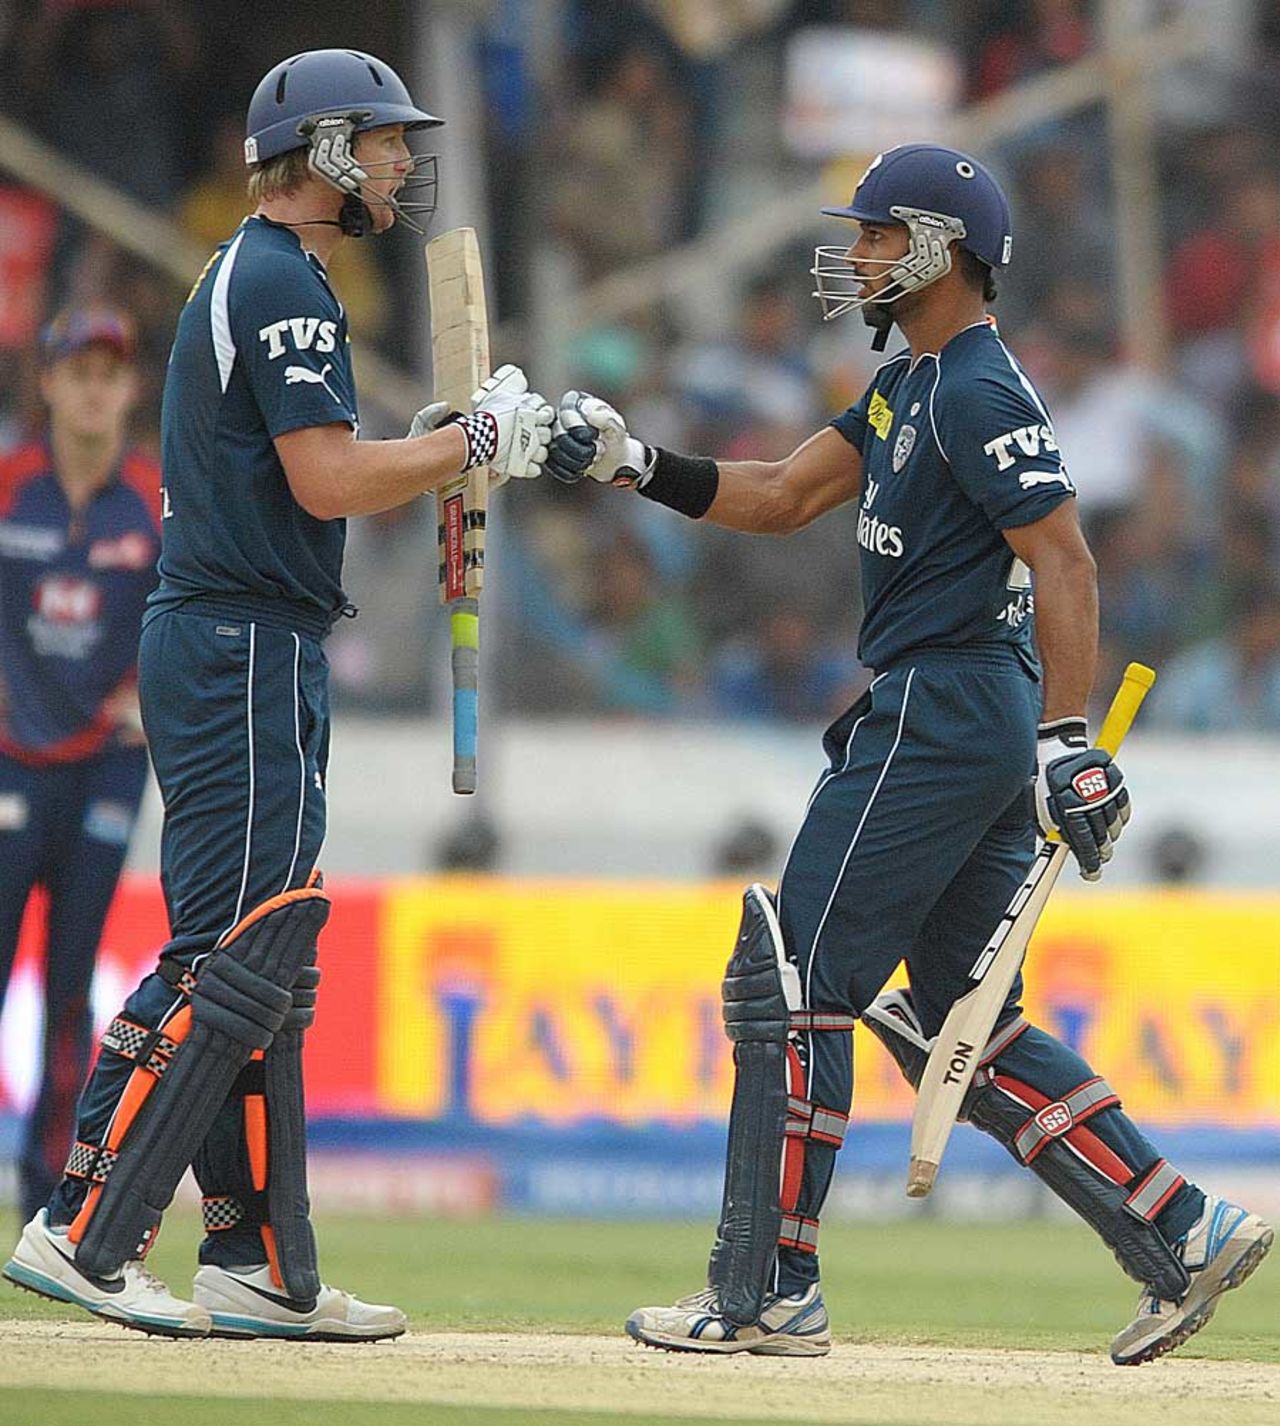 Cameron White and Shikhar Dhawan set up Deccan Chargers, Deccan Chargers v Delhi Daredevils, IPL 2012, Hyderabad